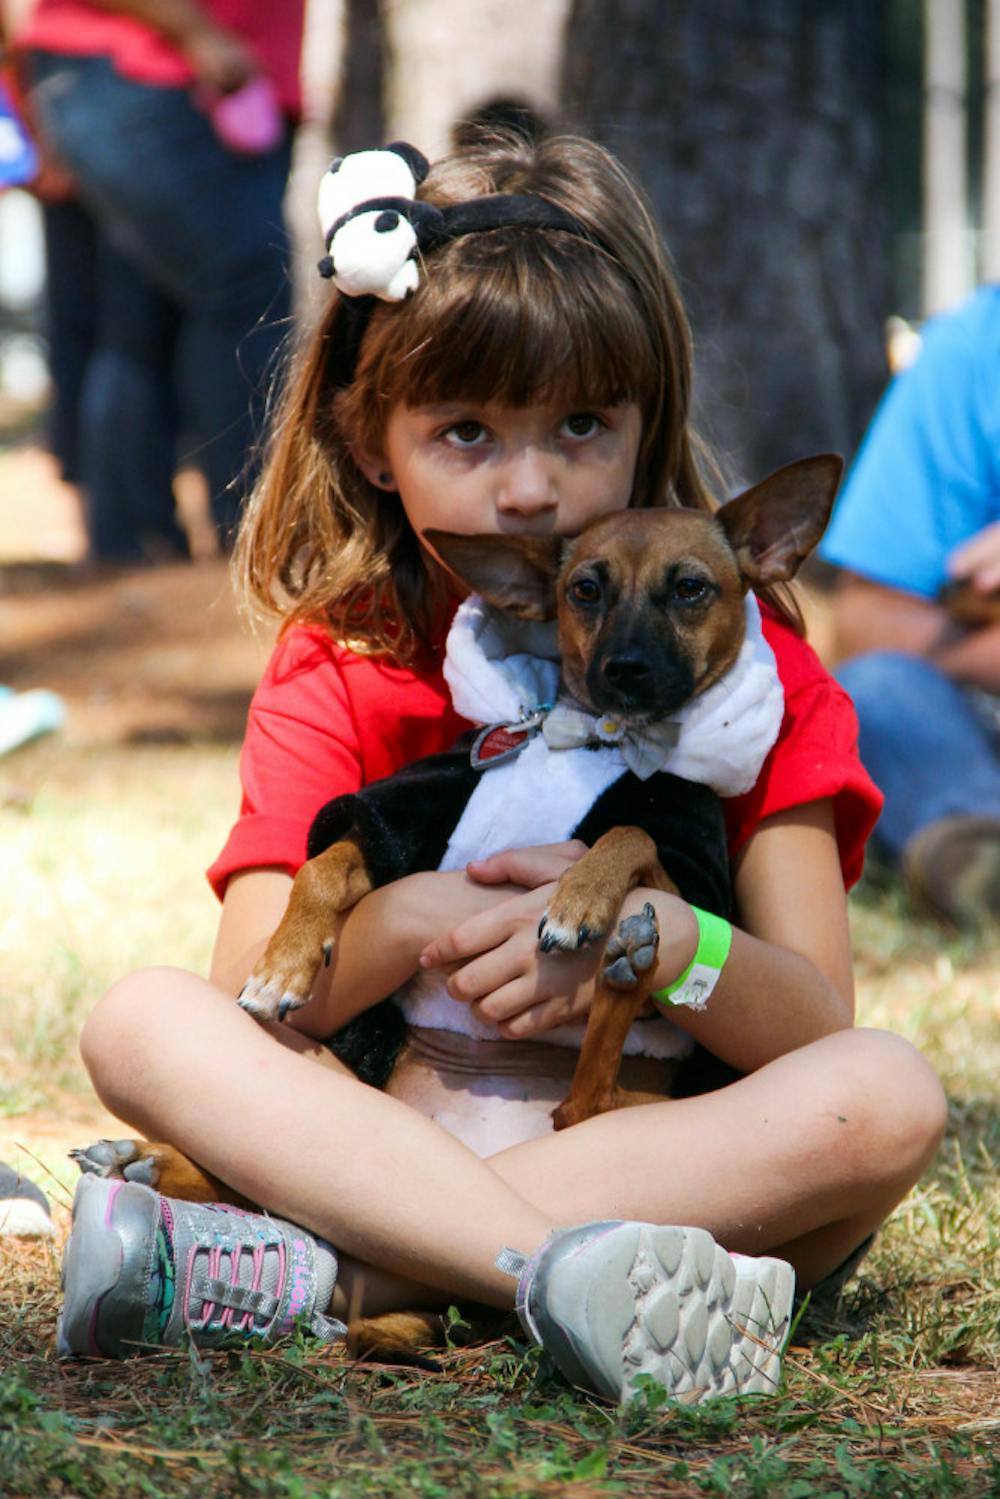 <p><span id="docs-internal-guid-6986f558-7fff-de7c-ede9-9eb7230351e3"><span>Seven-year-old Abigail Leonard holds her 3-year-old dog, Ginger, on Sunday during the annual Halloweener Derby. The Leonard family adopted Ginger after she was displaced by Hurricane Irma.</span></span></p>